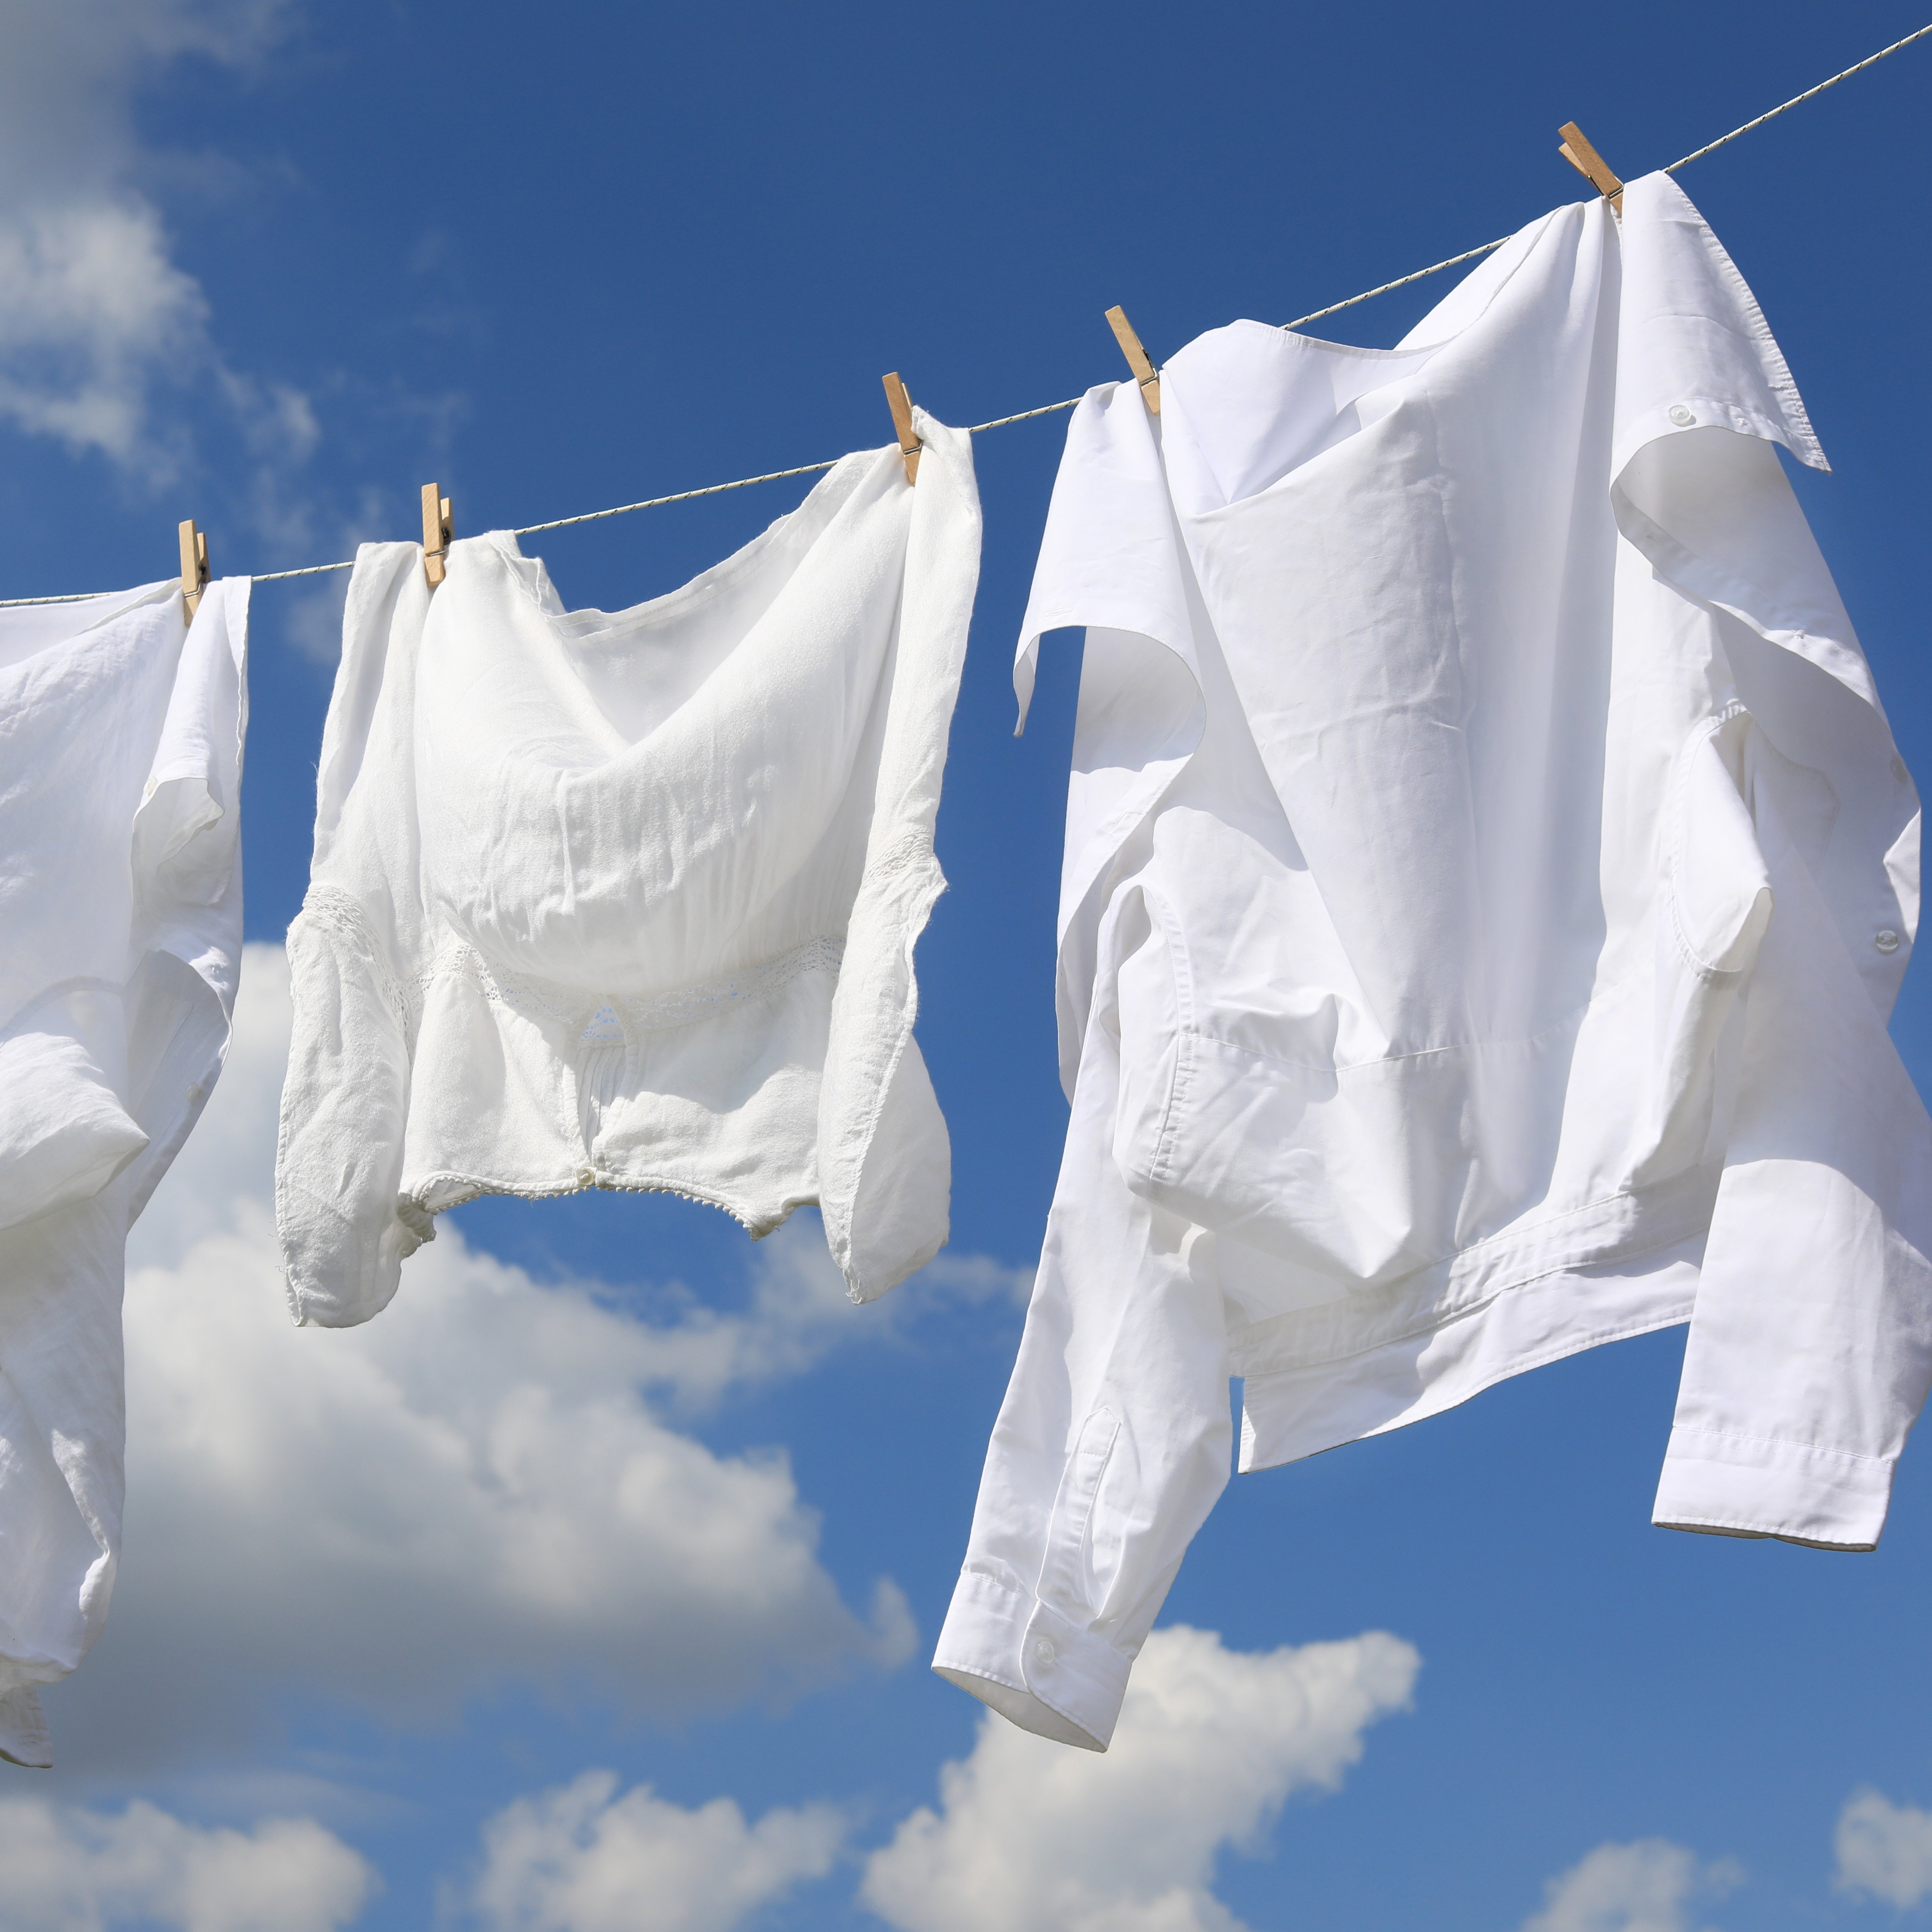 three linen shirts hanging to dry on a clothesline